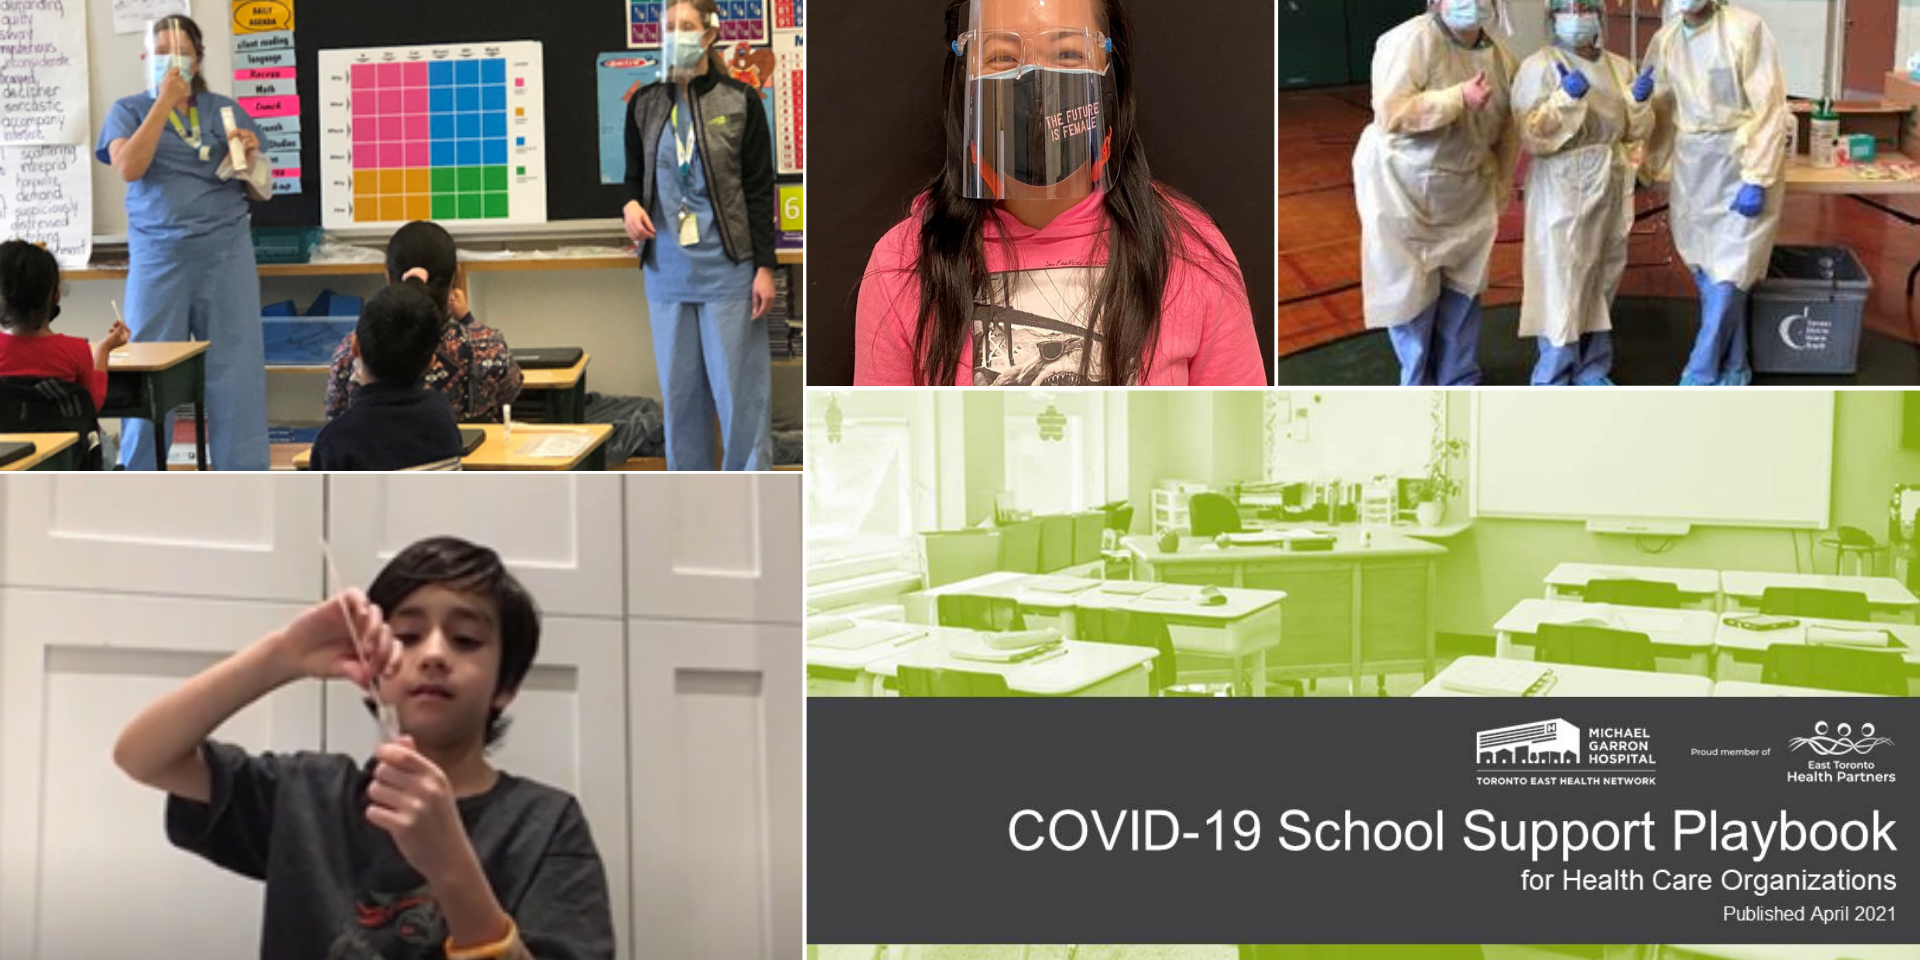 The MGH COVID-19 School Support Playbook outlines demonstrated strategies for protecting students, school staff and families during the COVID-19 pandemic.